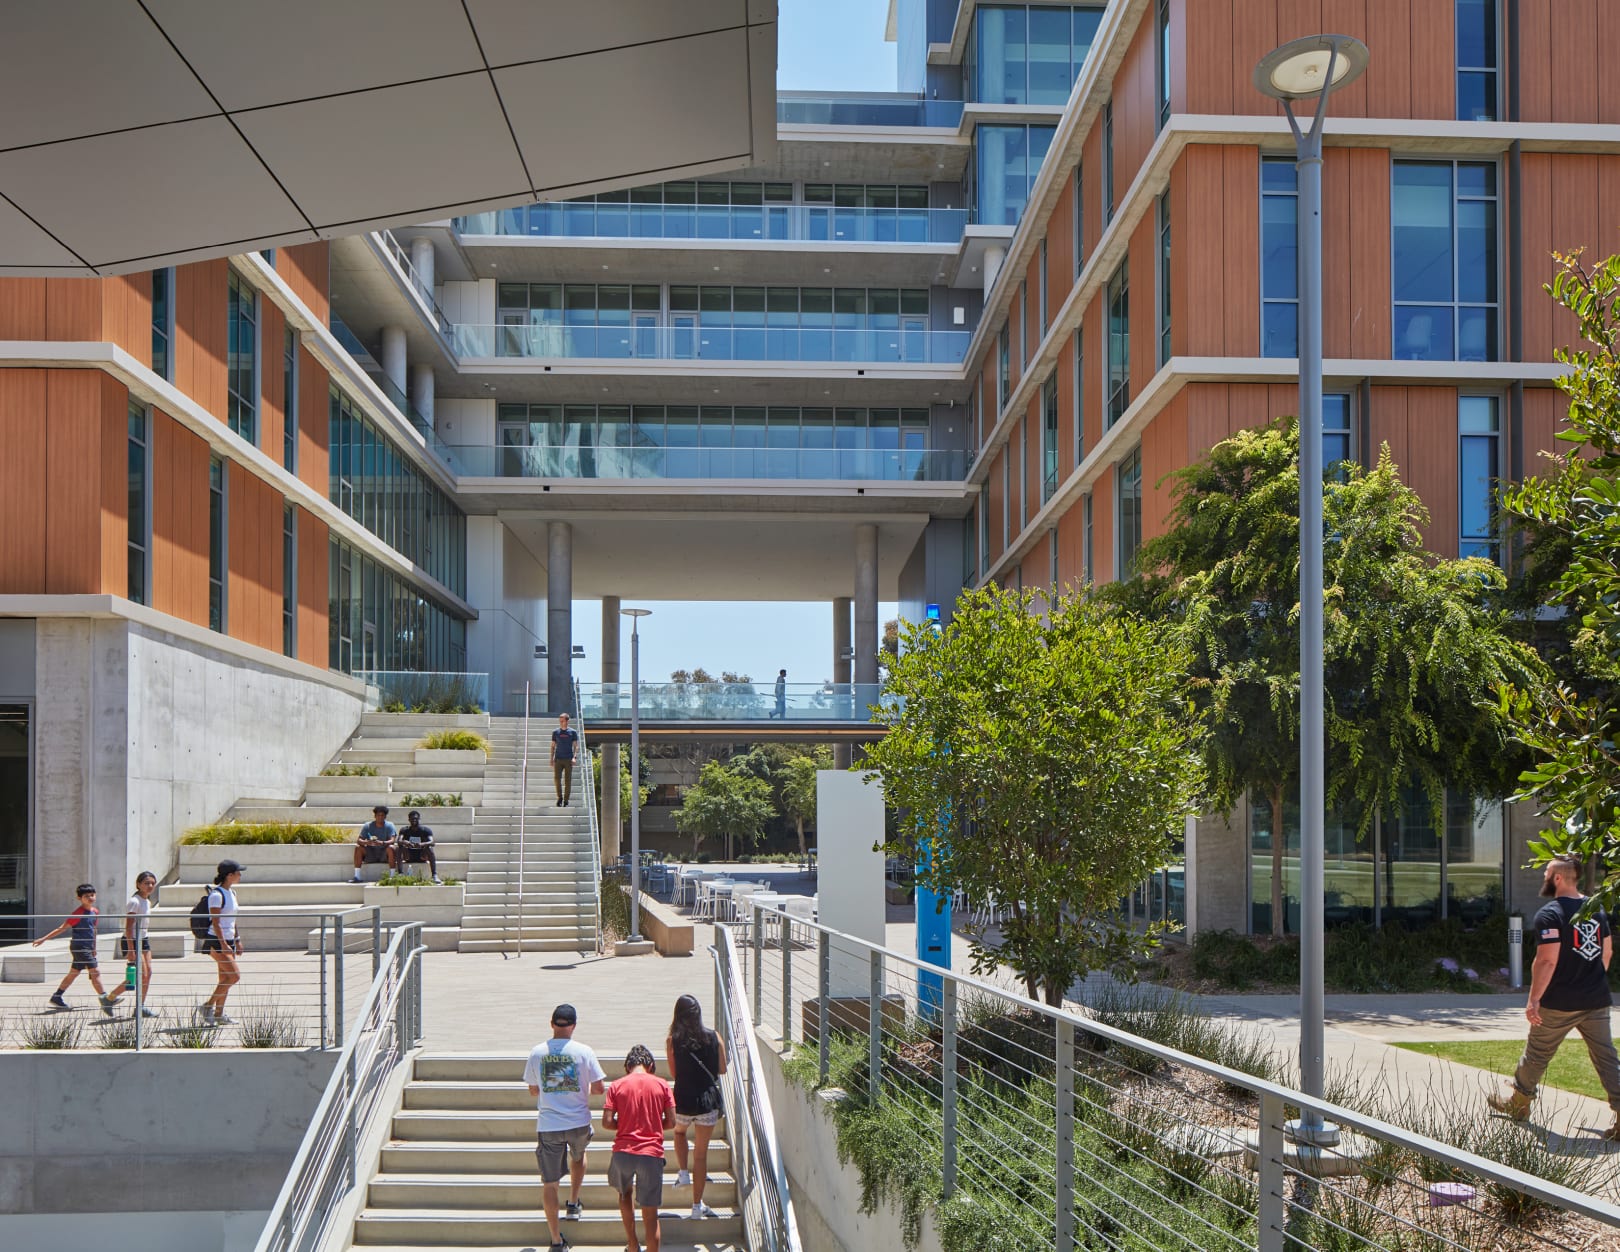 NTPLLN’s evidence-based and high-performance design reduces environmental impact and supports well-being of students, staff and community members.